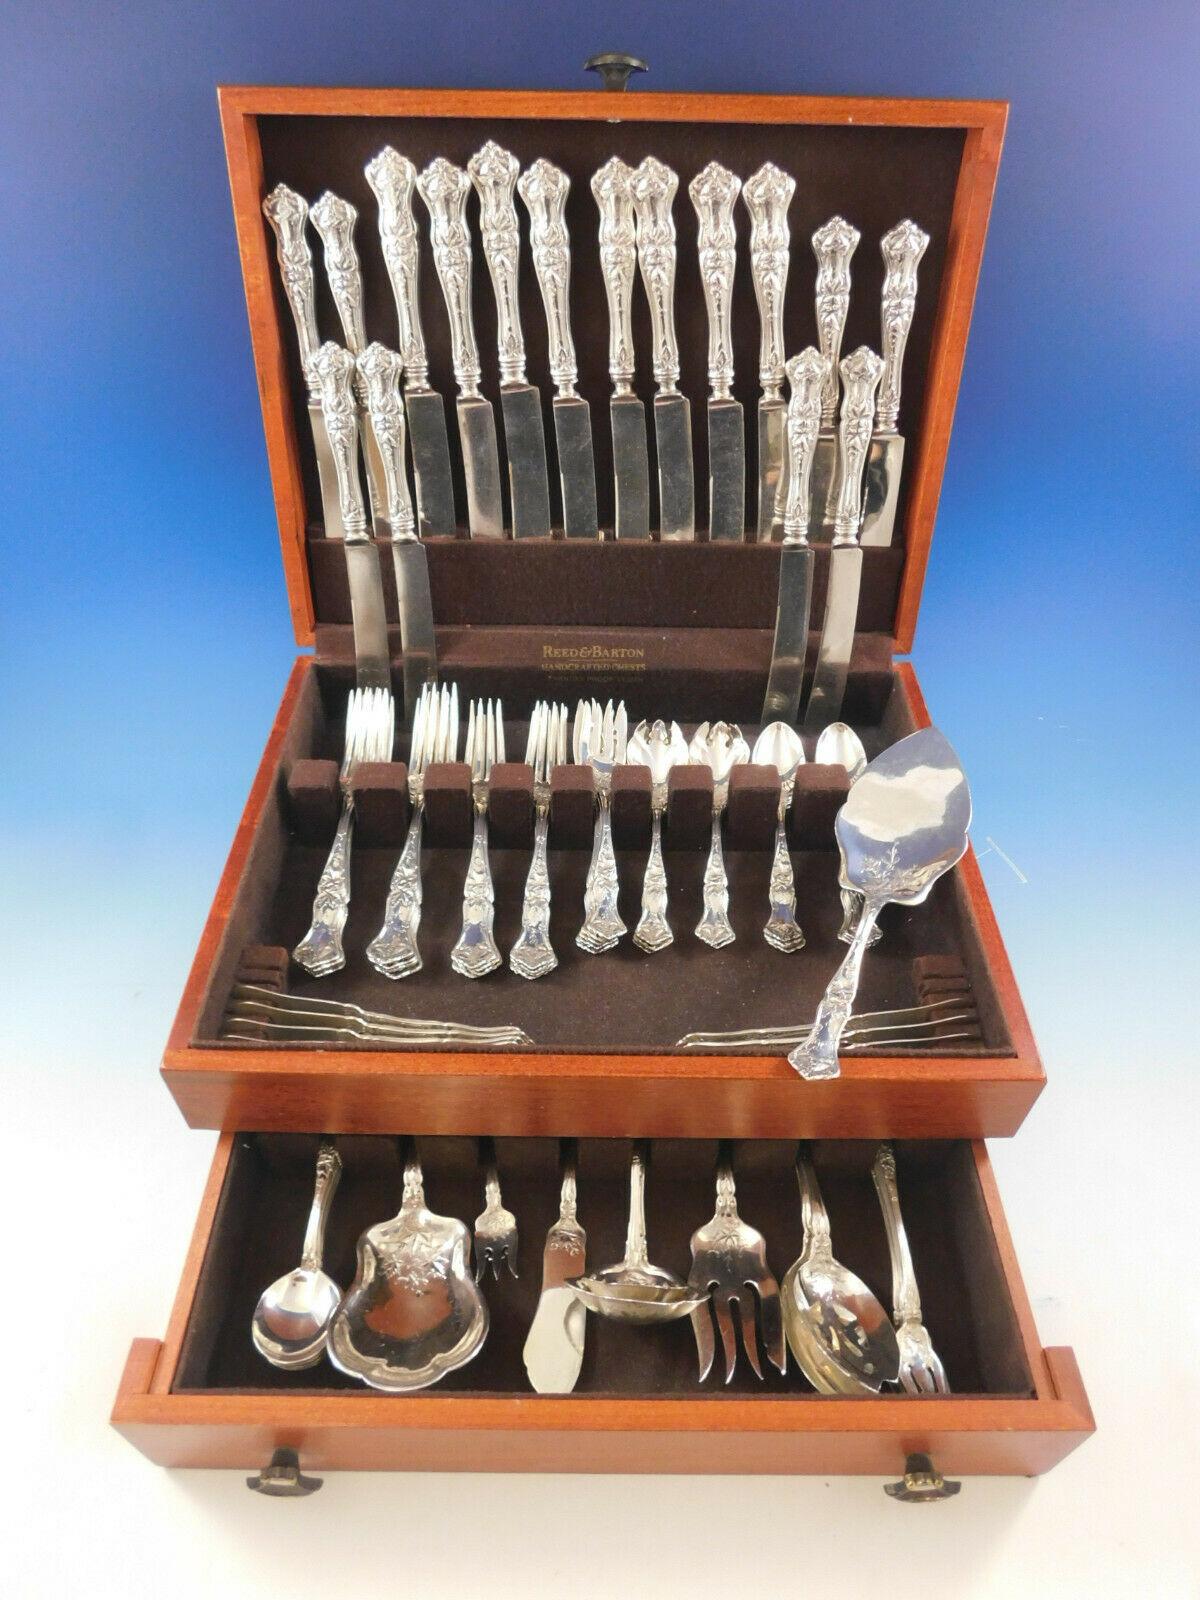 Superb Edgewood by International, circa 1909, dinner & luncheon sterling silver flatware set - 89 pieces. This pattern features gorgeous maple leaves that flow down from the handles to above the tines, into the spoon bowls, and onto the serving